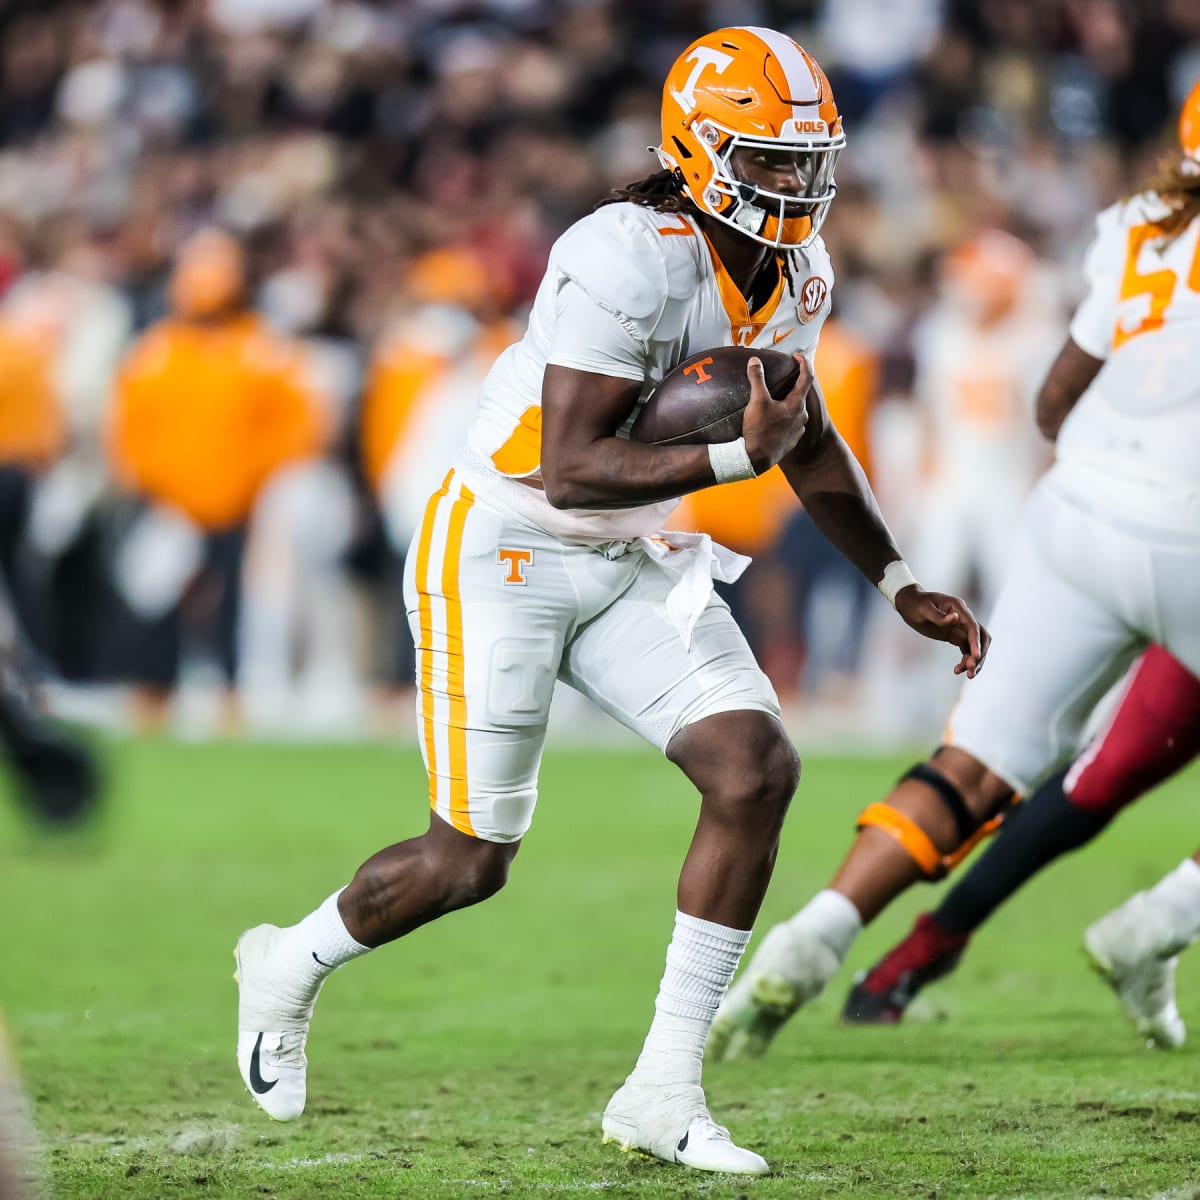 Tennessee Football How To Watch vs